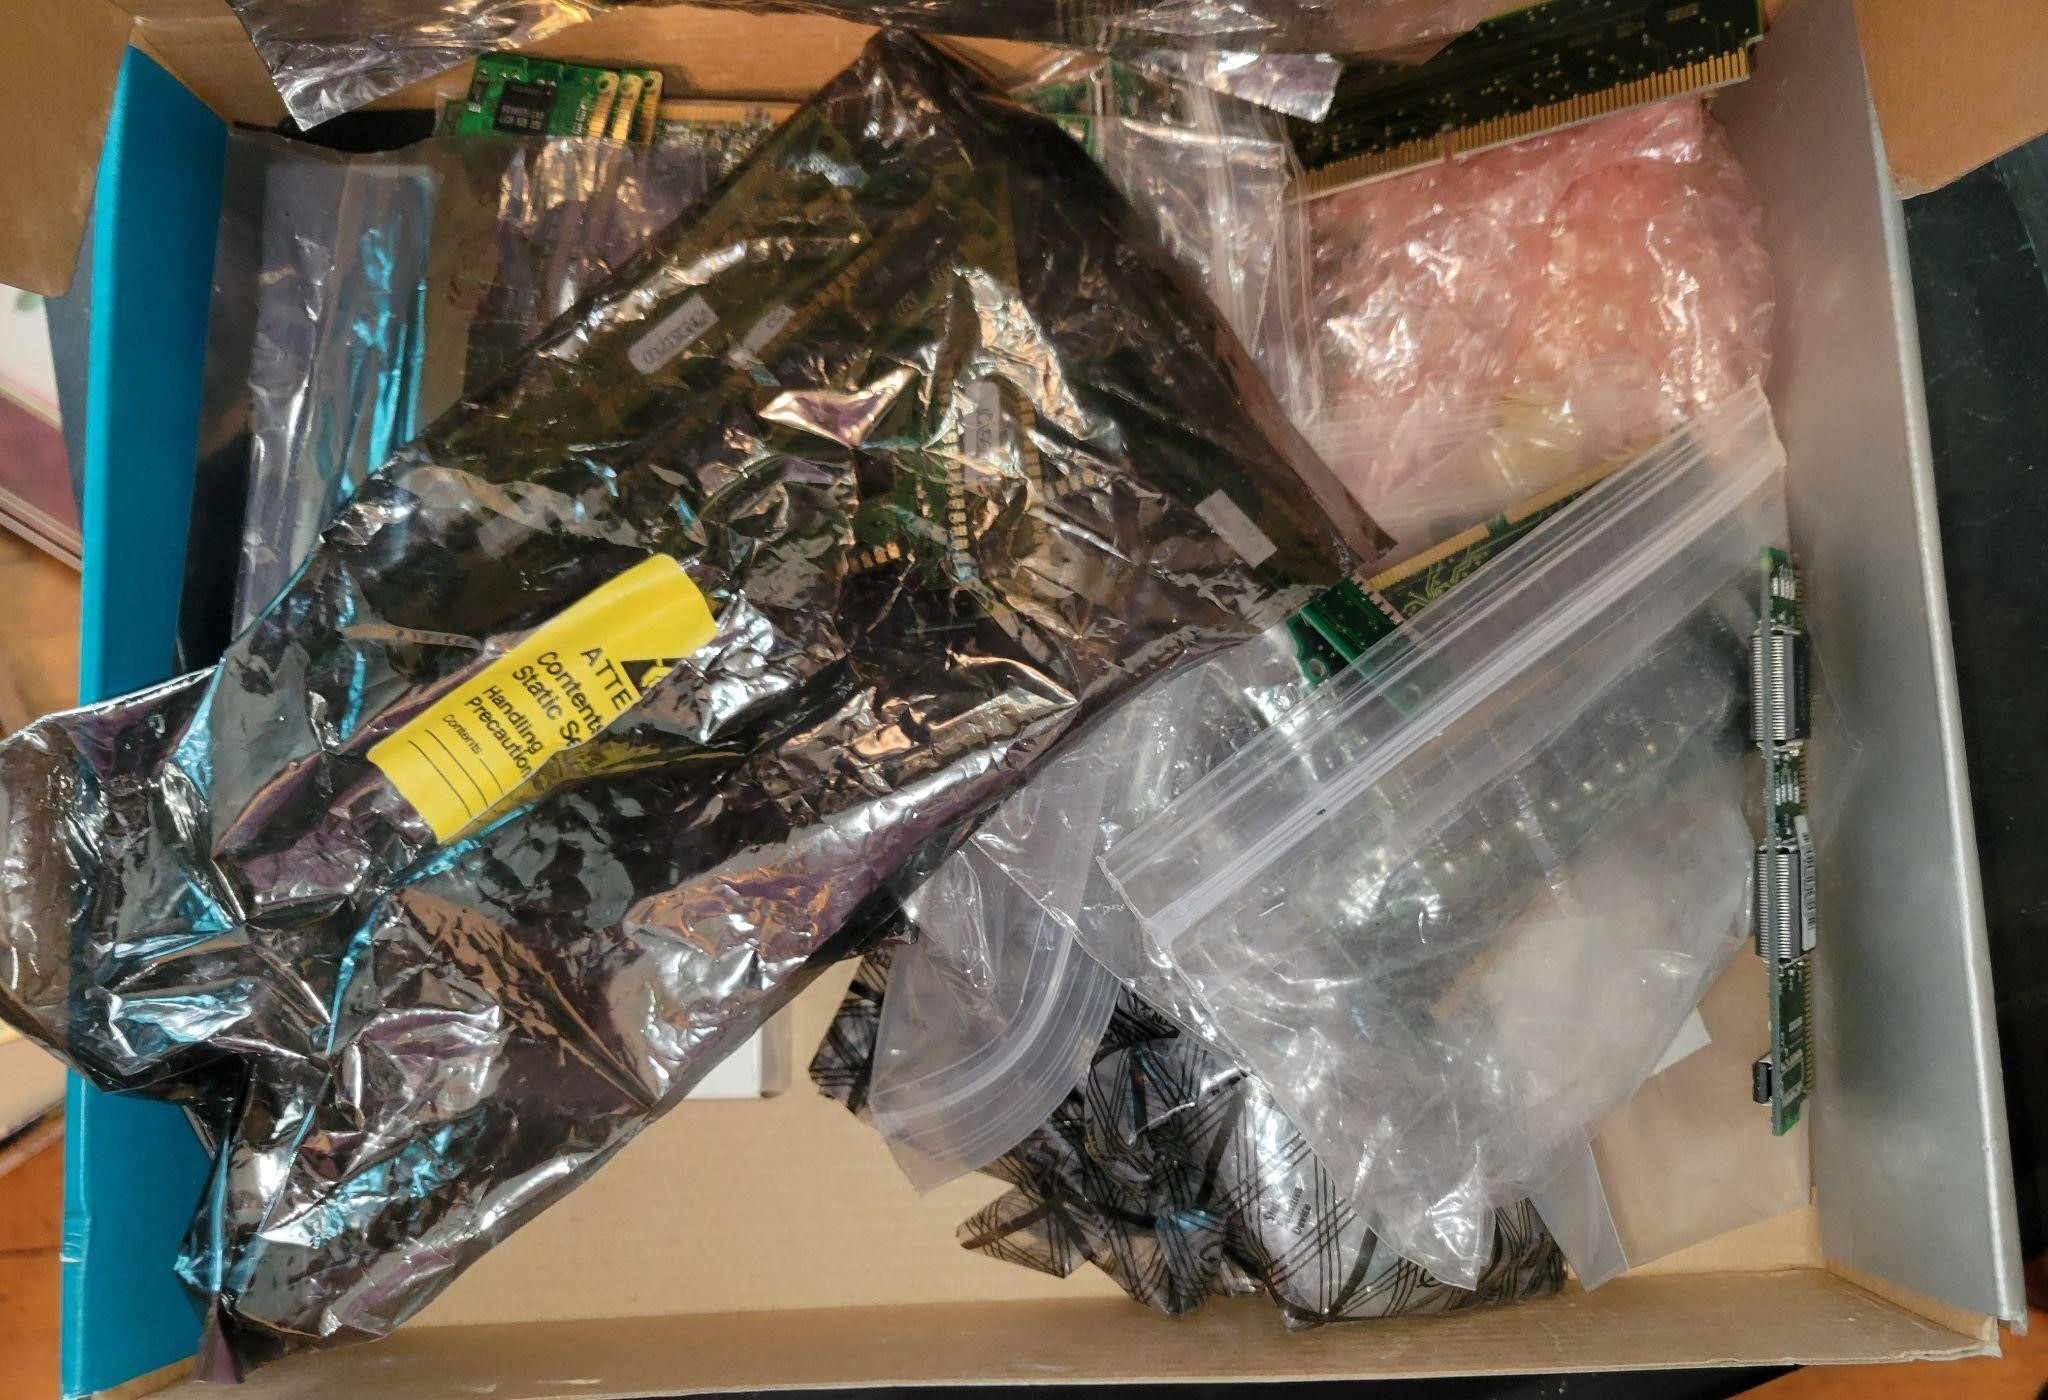 Box of Computer Mainboards